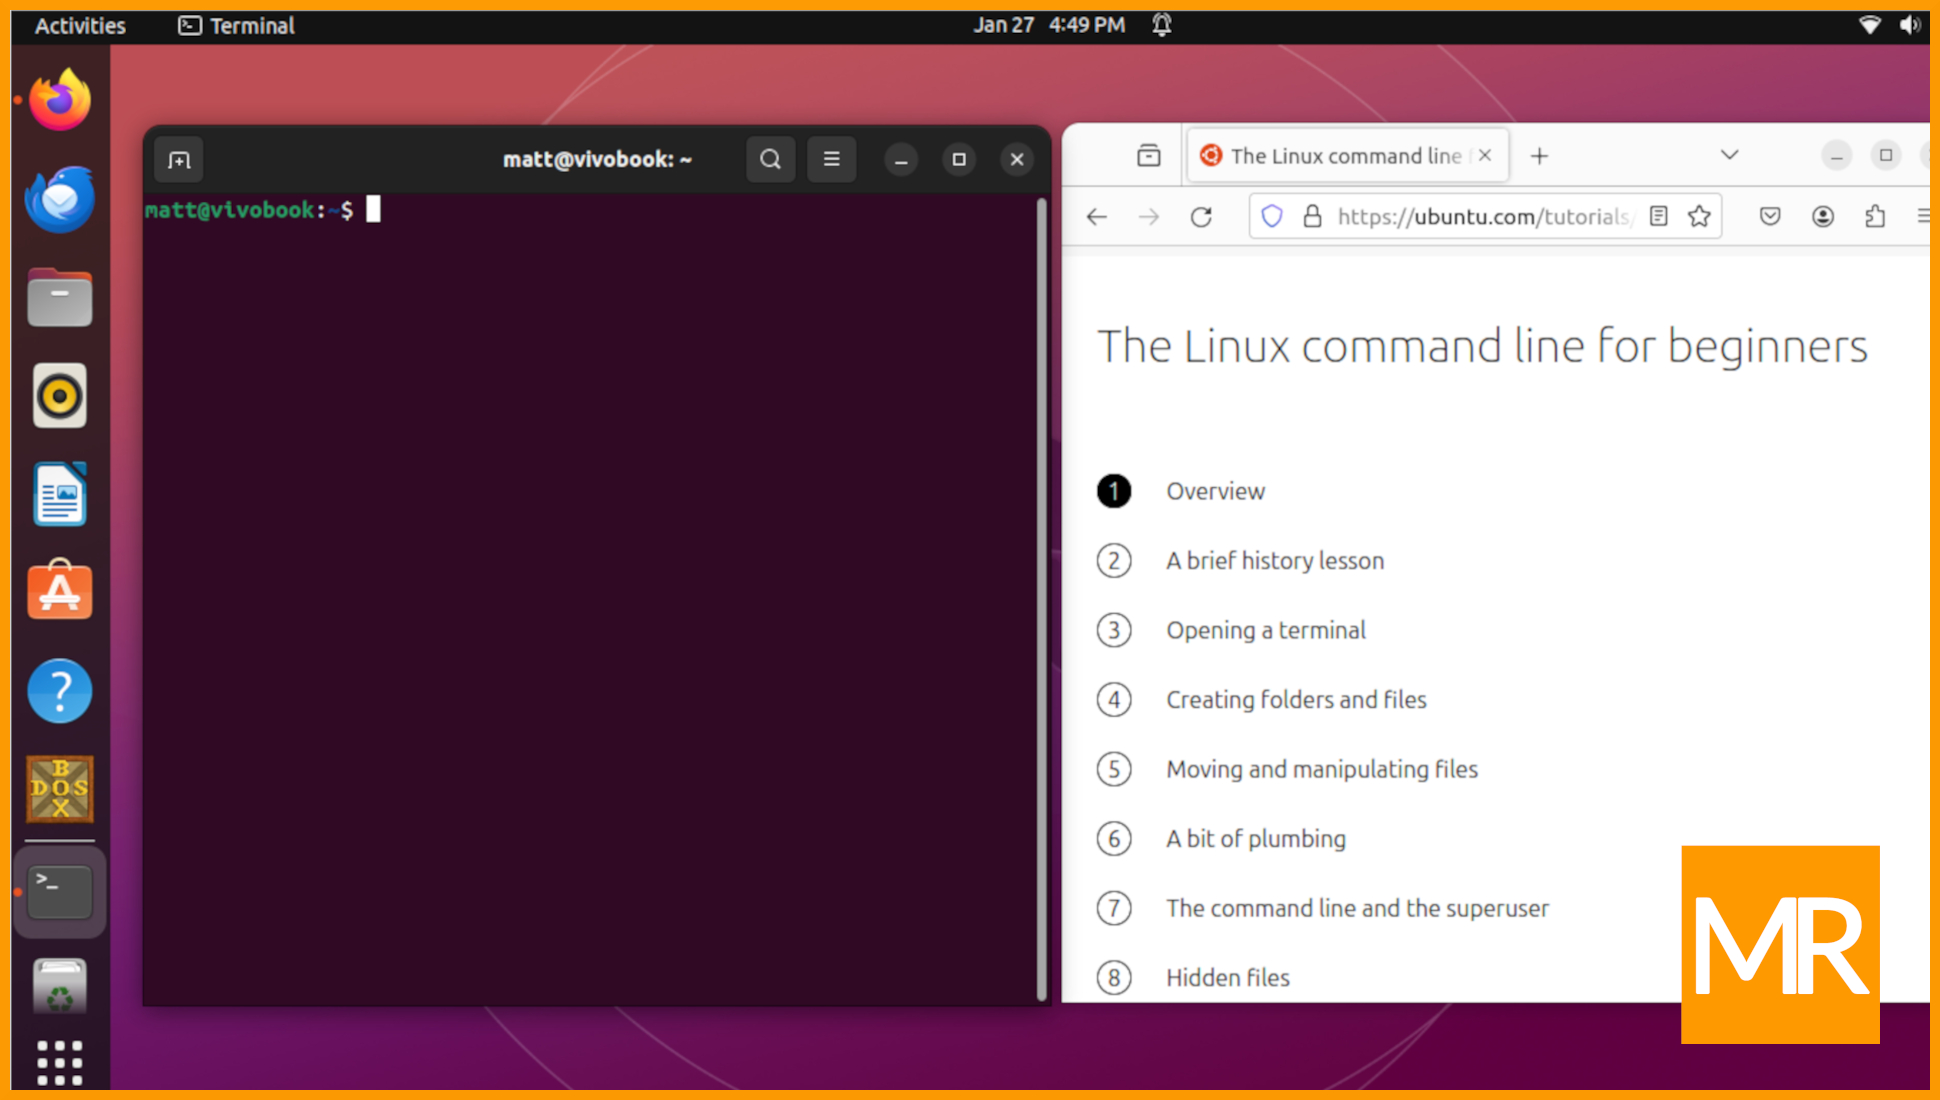 Got an hour? Learn the basics of the Linux command line